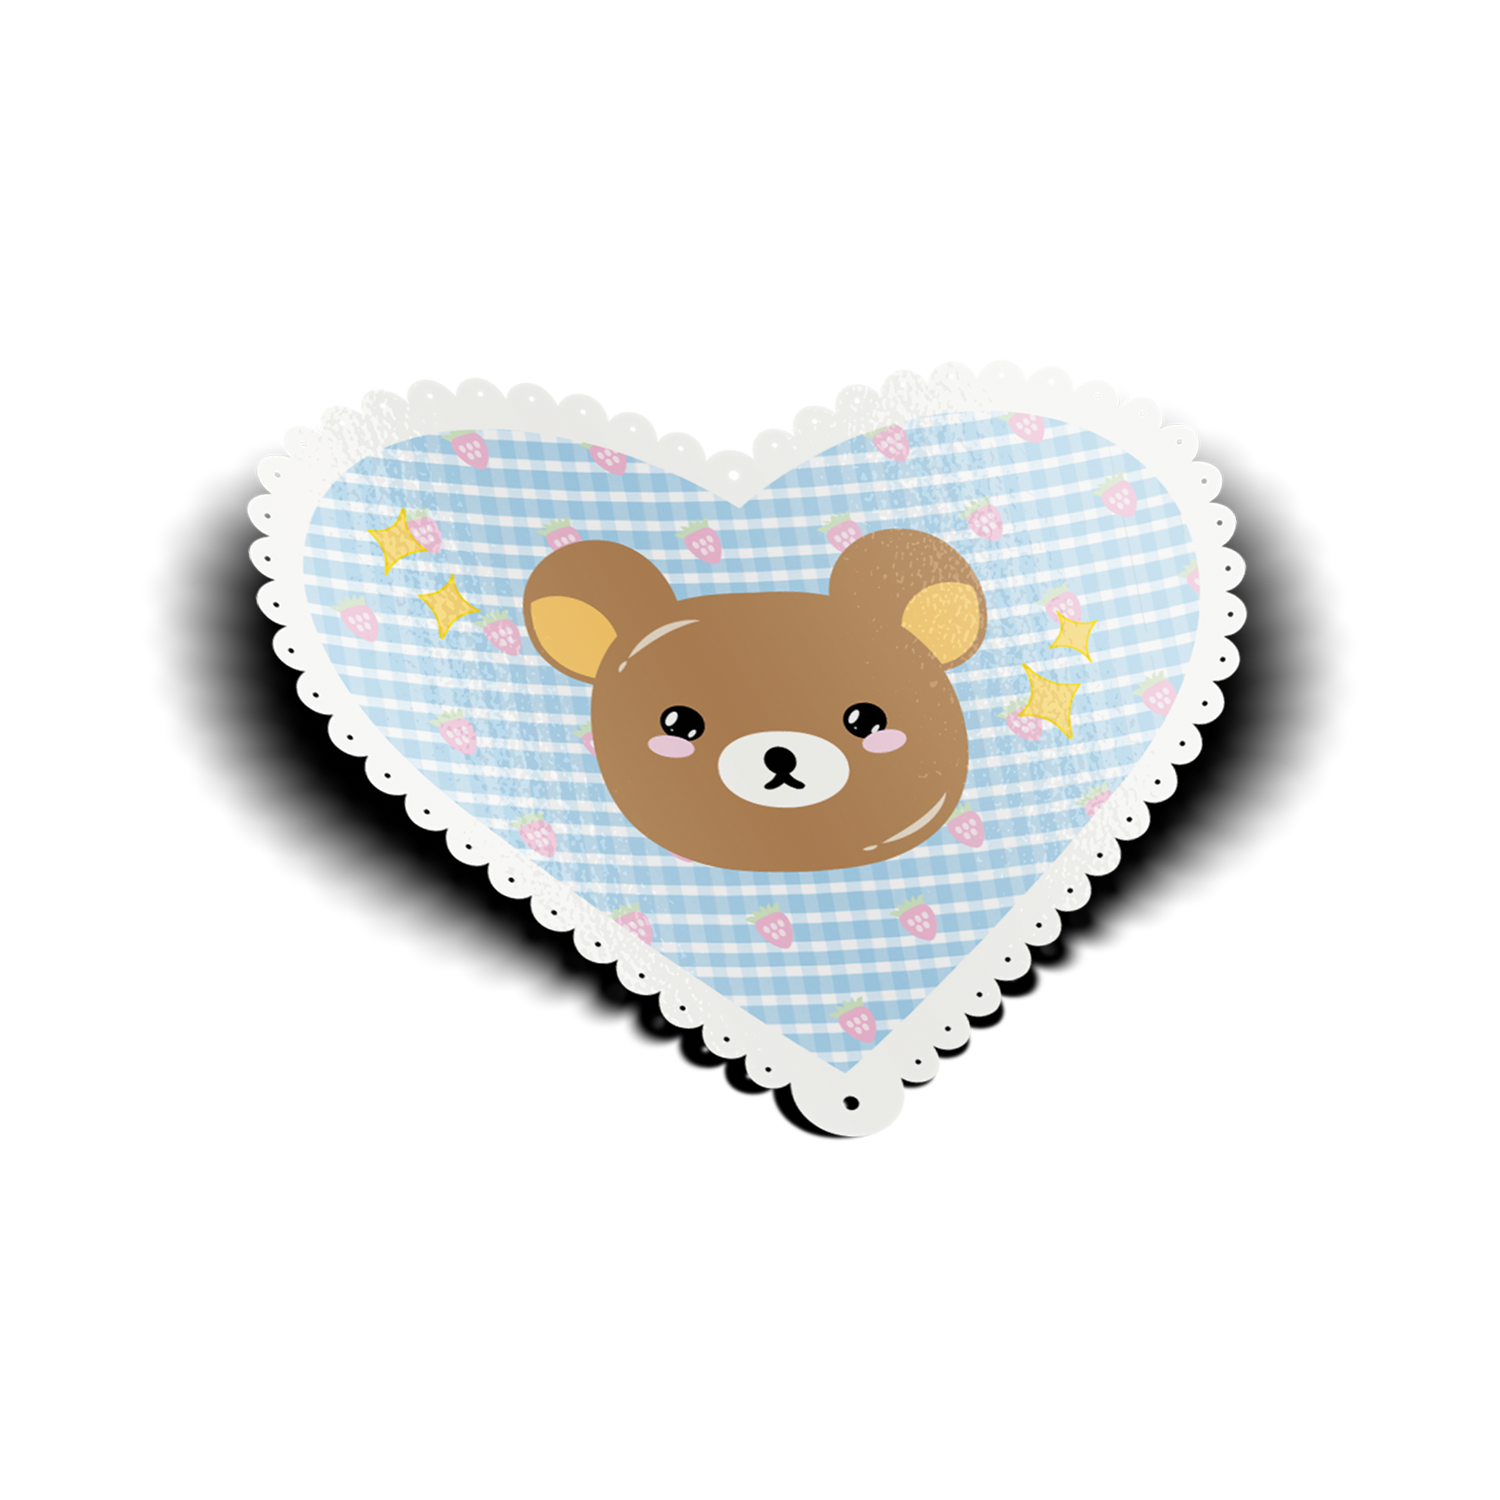 Brown Bear Sticker design is a brown bear inside a blue lace-scalloped heart with yellow sparkles.